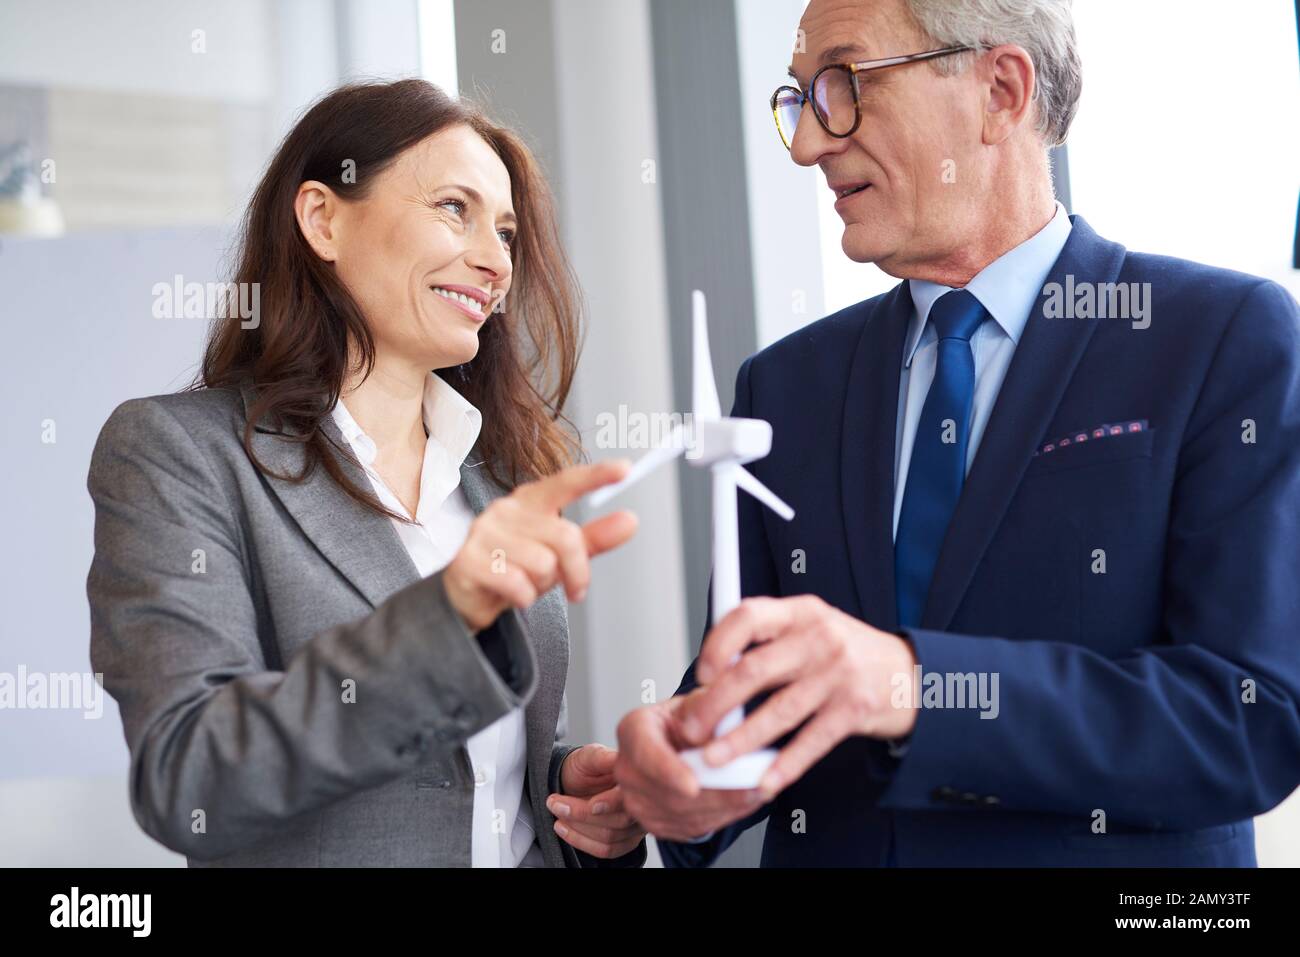 Business workers having a conversation about wind energy Stock Photo